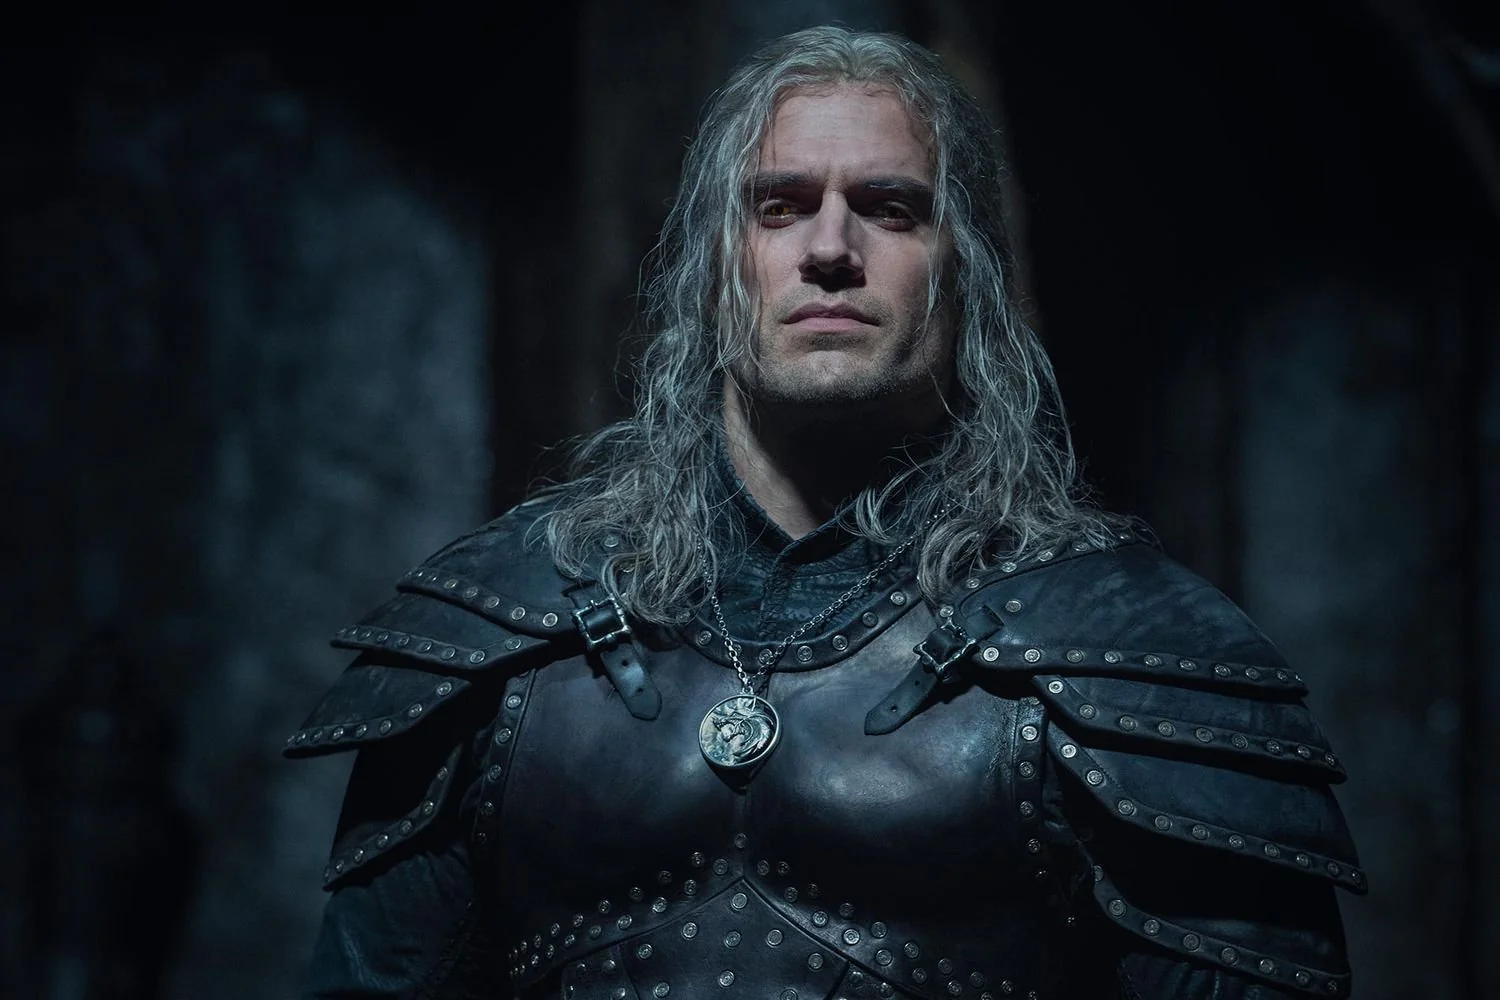 Liam Hemsworth Surprises as The New Witcher: Fans React to His First Look as Geralt